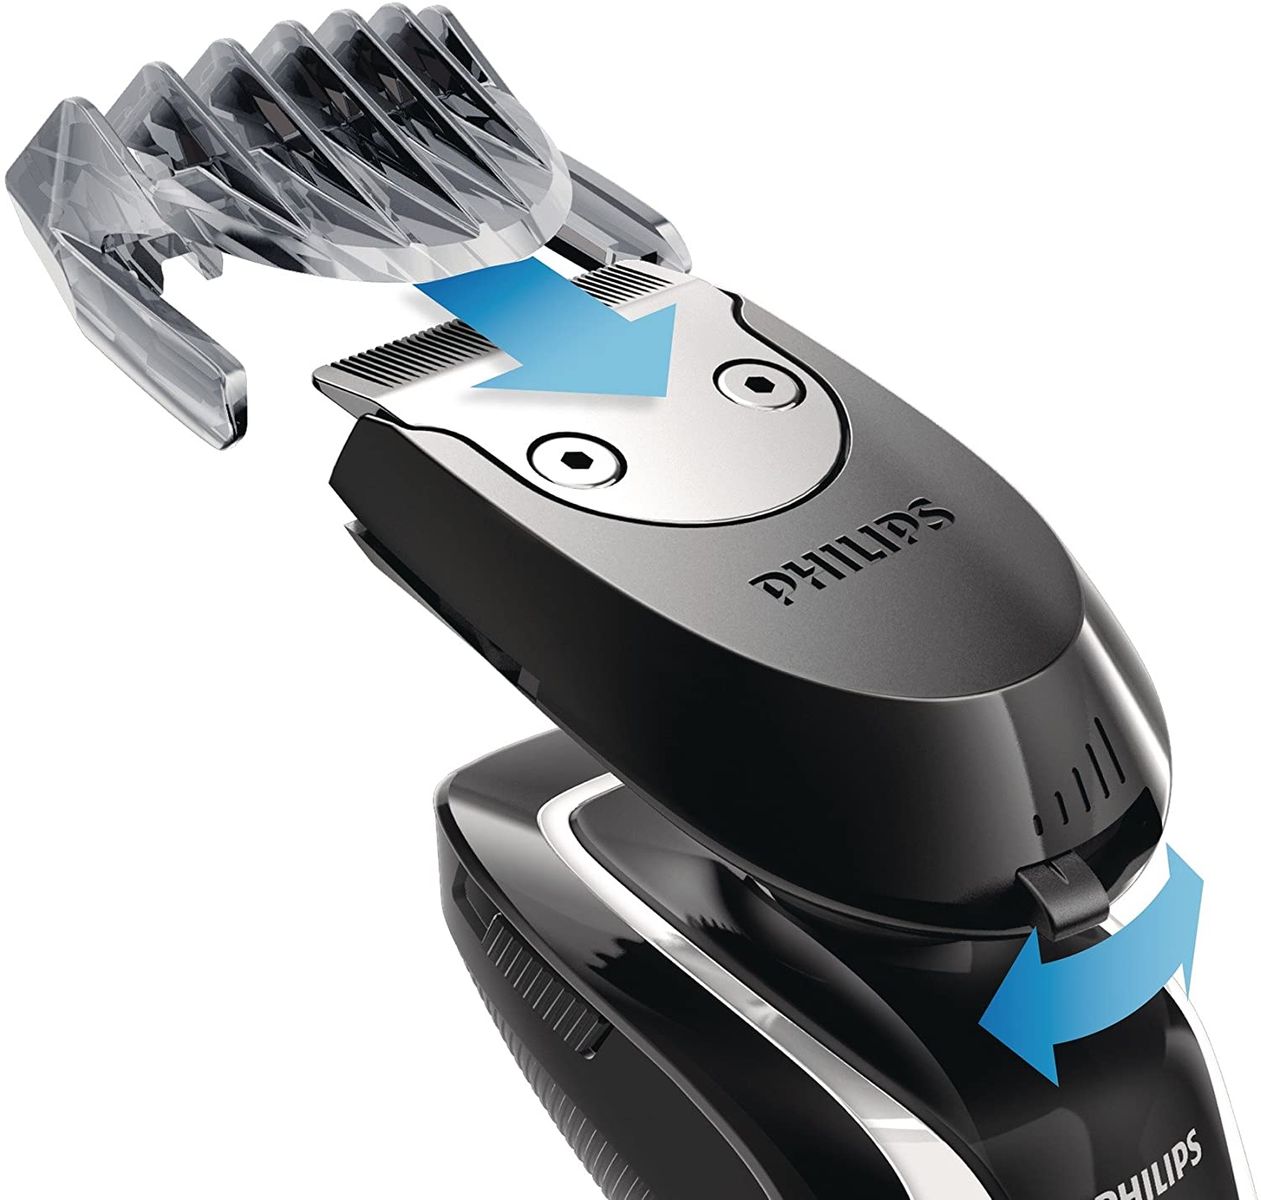 Philips RQ111/50 Click-On Styler - Trimming with styling and shaving - Upgrate for all Philips SensoTouch and Arcitec shavers